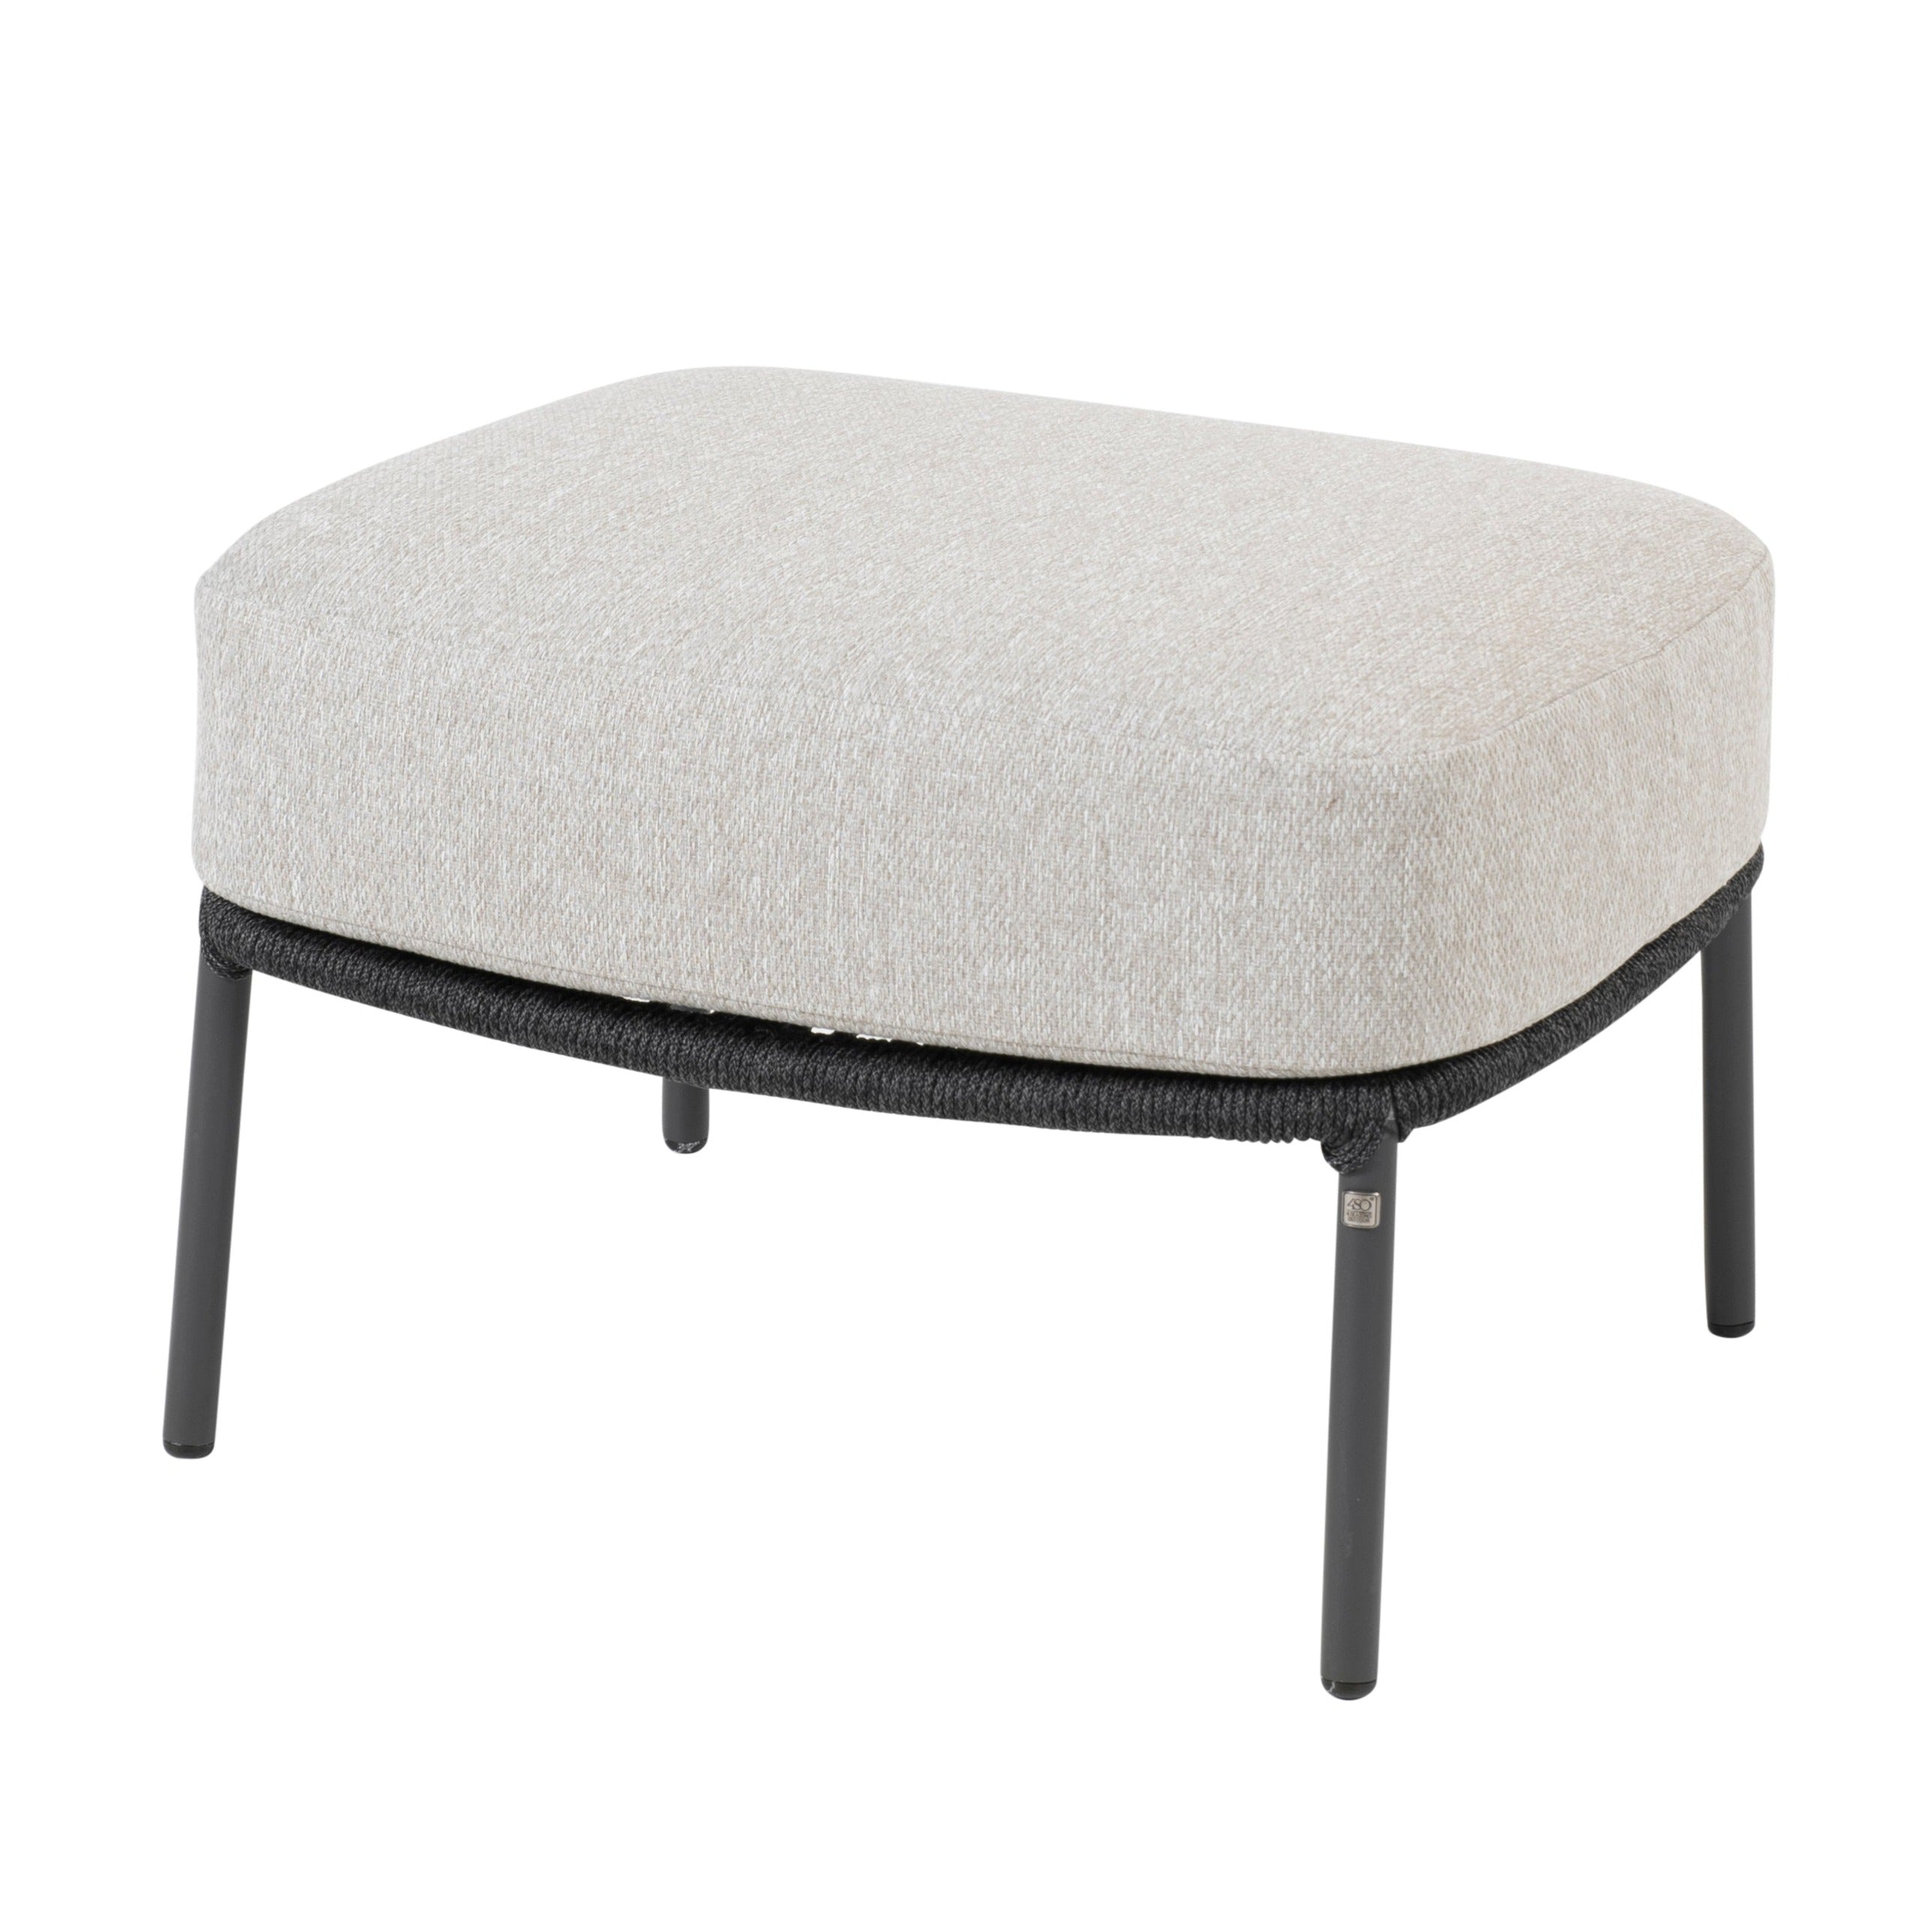 4 Seasons Outdoor Calpi Footstool Anthracite With Cushion